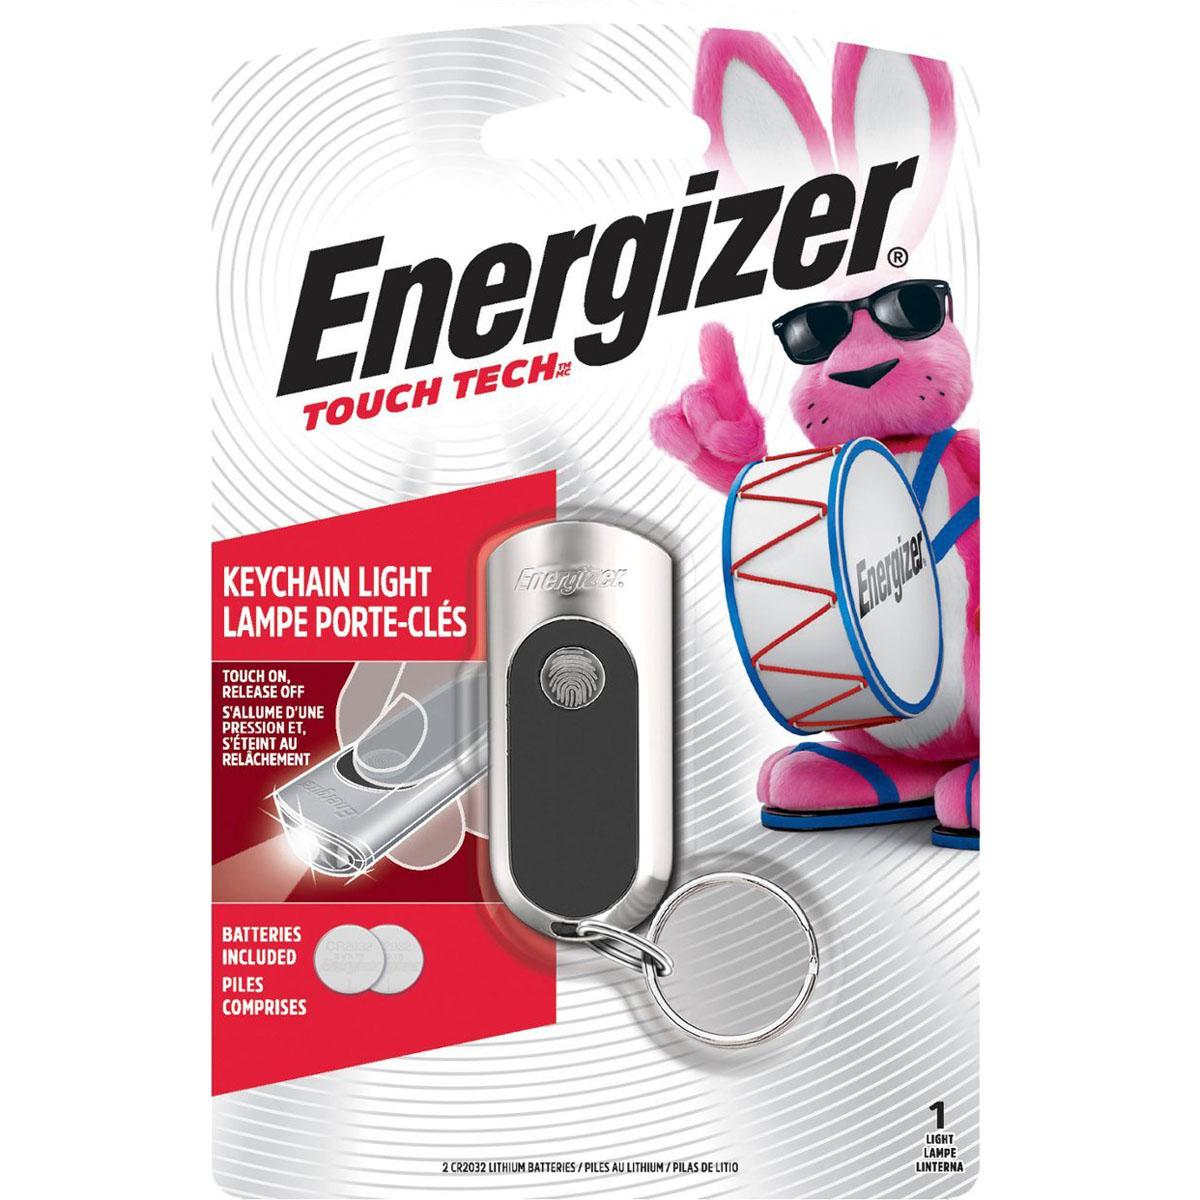 Energizer Touch Tech Keychain Light for $1.99